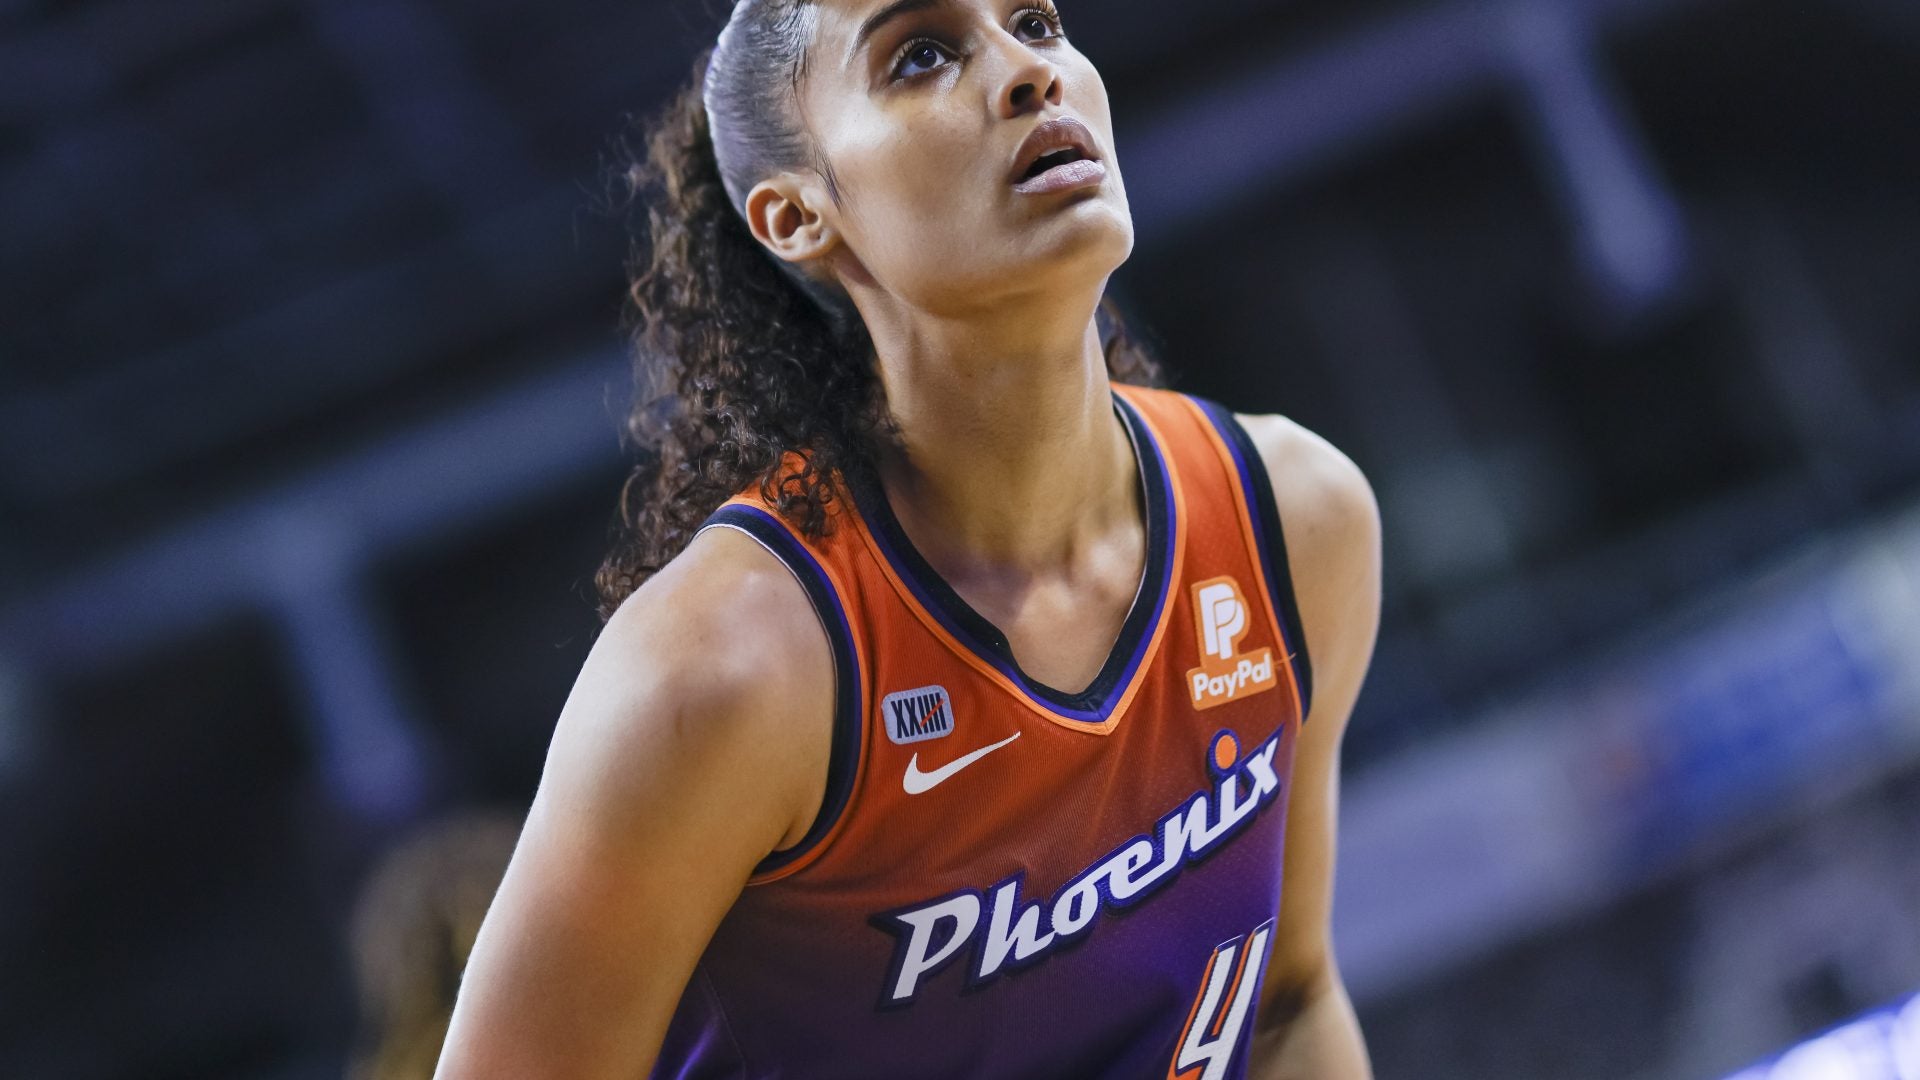 WNBA Star Skylar Diggins-Smith On Welcoming Her Second Child And Handling 'Snapback' Pressure: 'Give Yourself Grace'